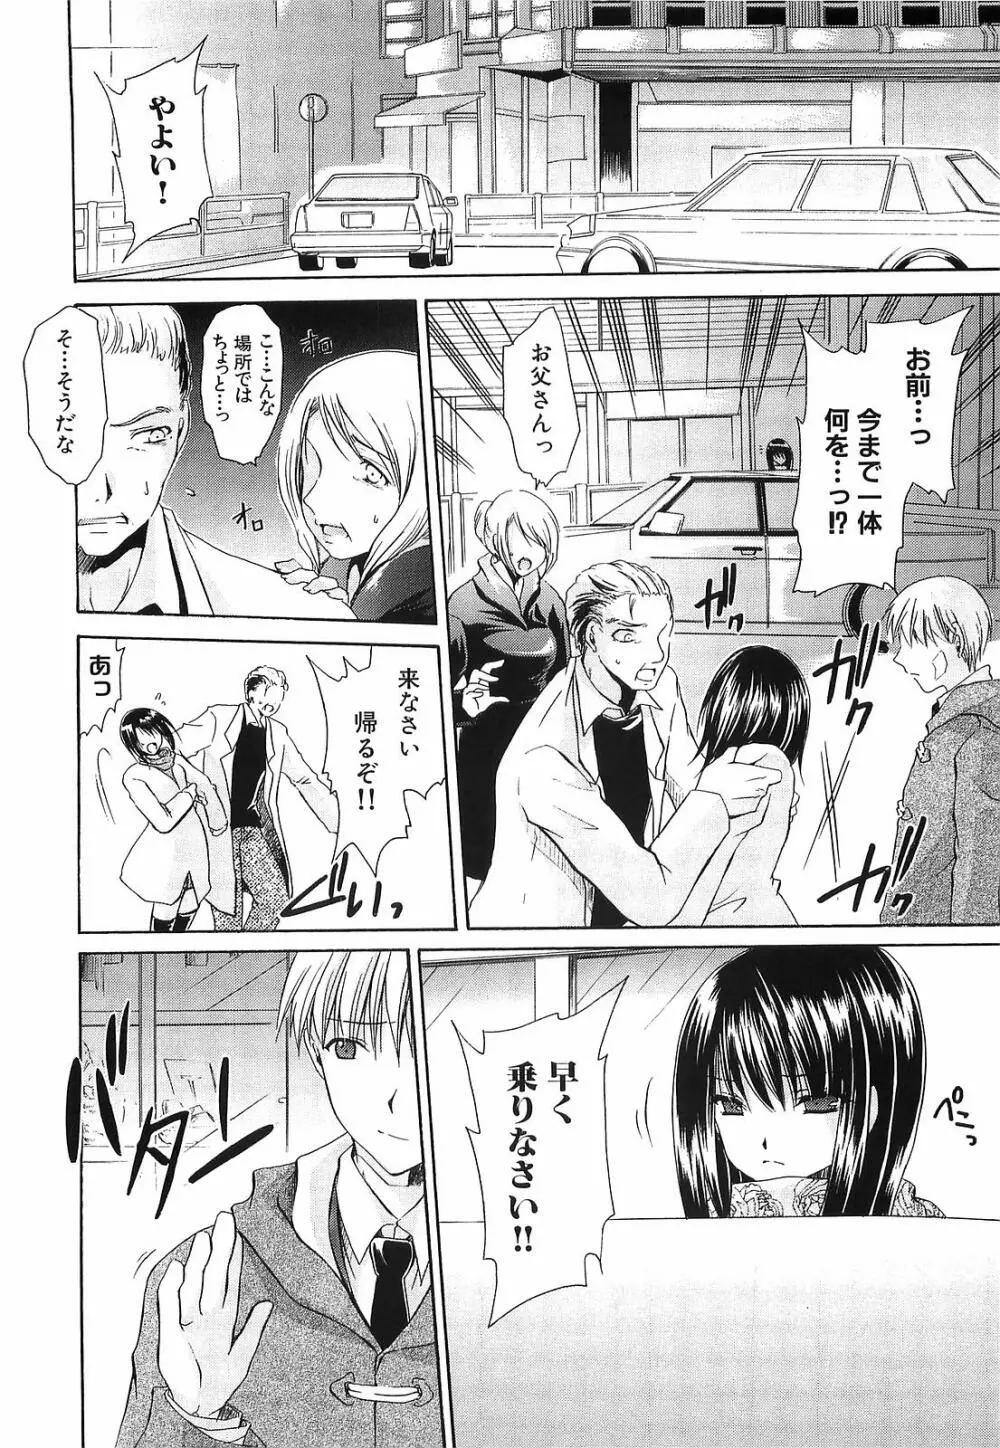 LOVE & HATE 3 FINAL～ENGAGE～通常版 Page.191